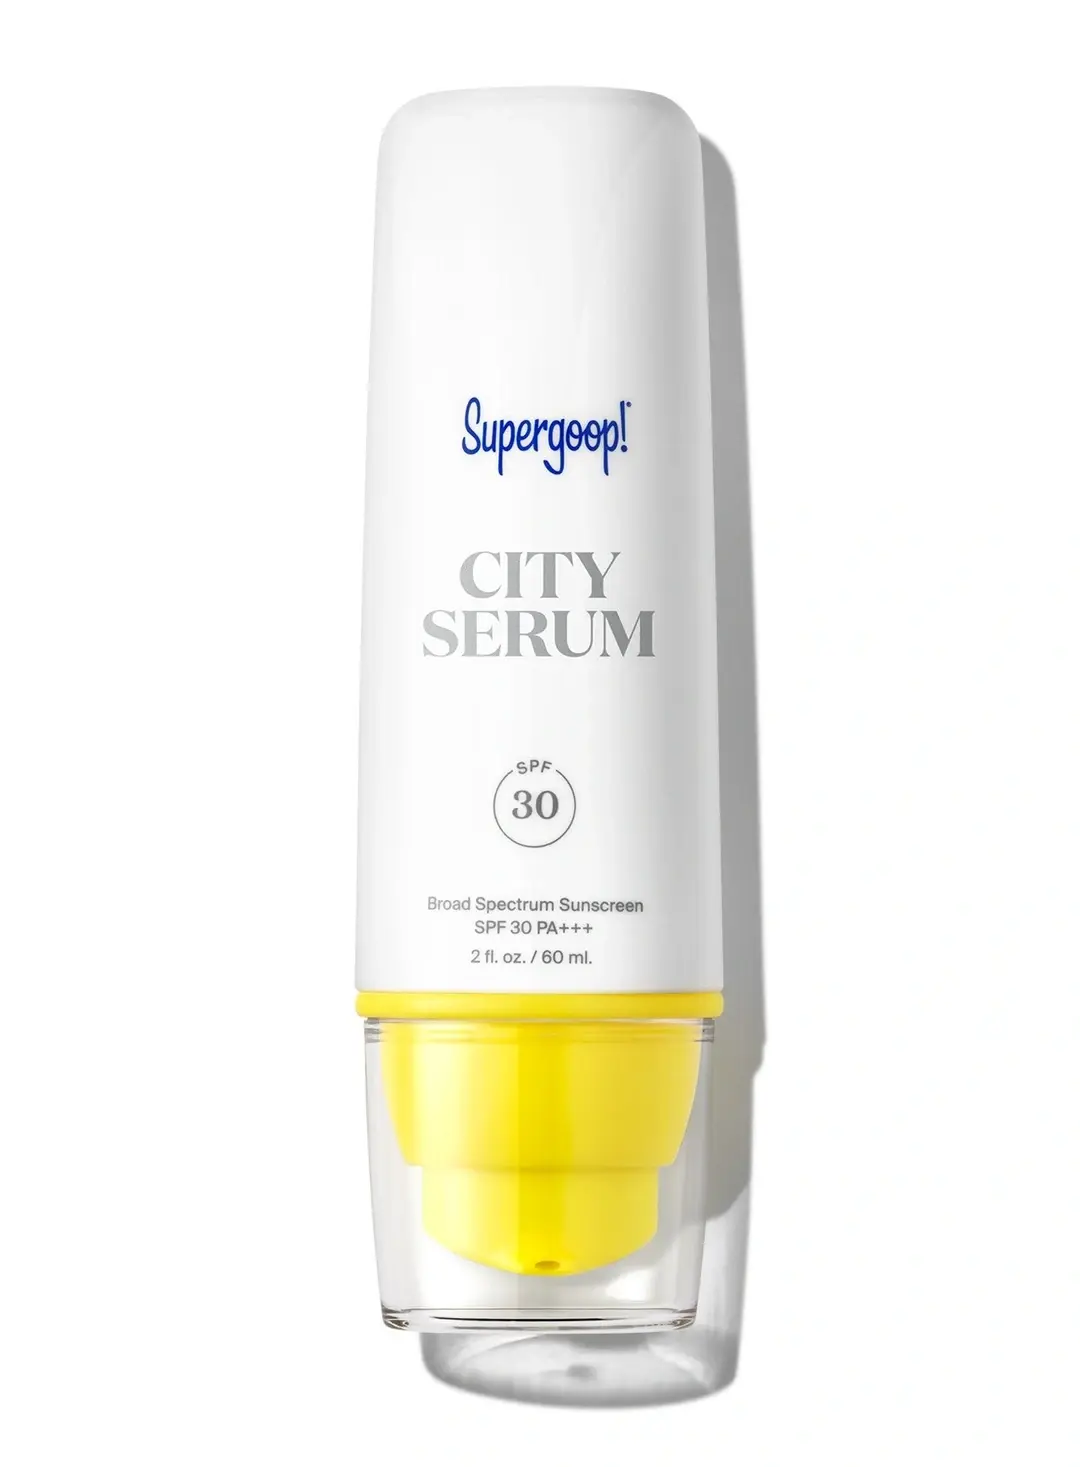 Supergoop! City Serum, 2 fl oz - SPF 30 PA+++ Anti-Aging Morning Lotion - Lightweight, Antioxidant-Rich Formula - Hydrating Vitamin Serum for Face - Prep & Protect with Vitamin E & B5 - Great for Guys 2 Fl Oz (Pack of 1)